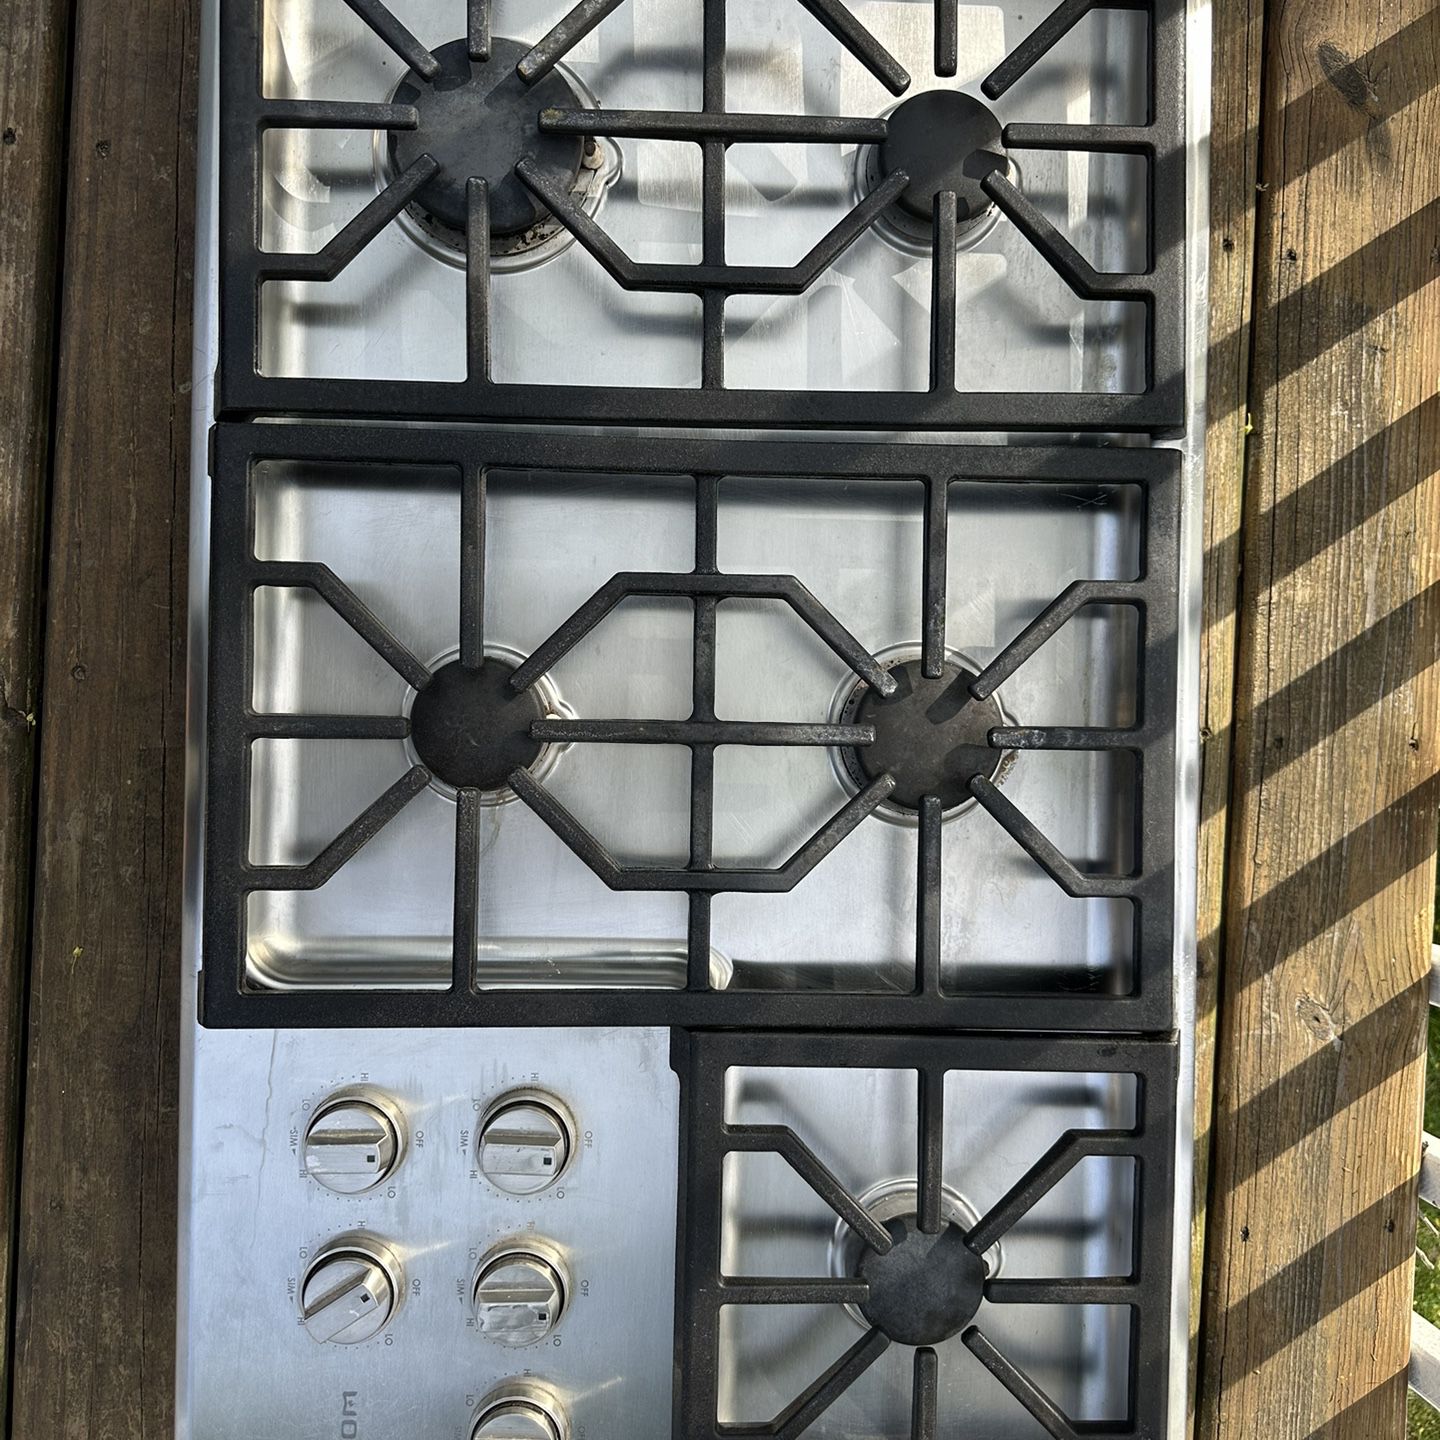 Wolf Gas Cooktop 